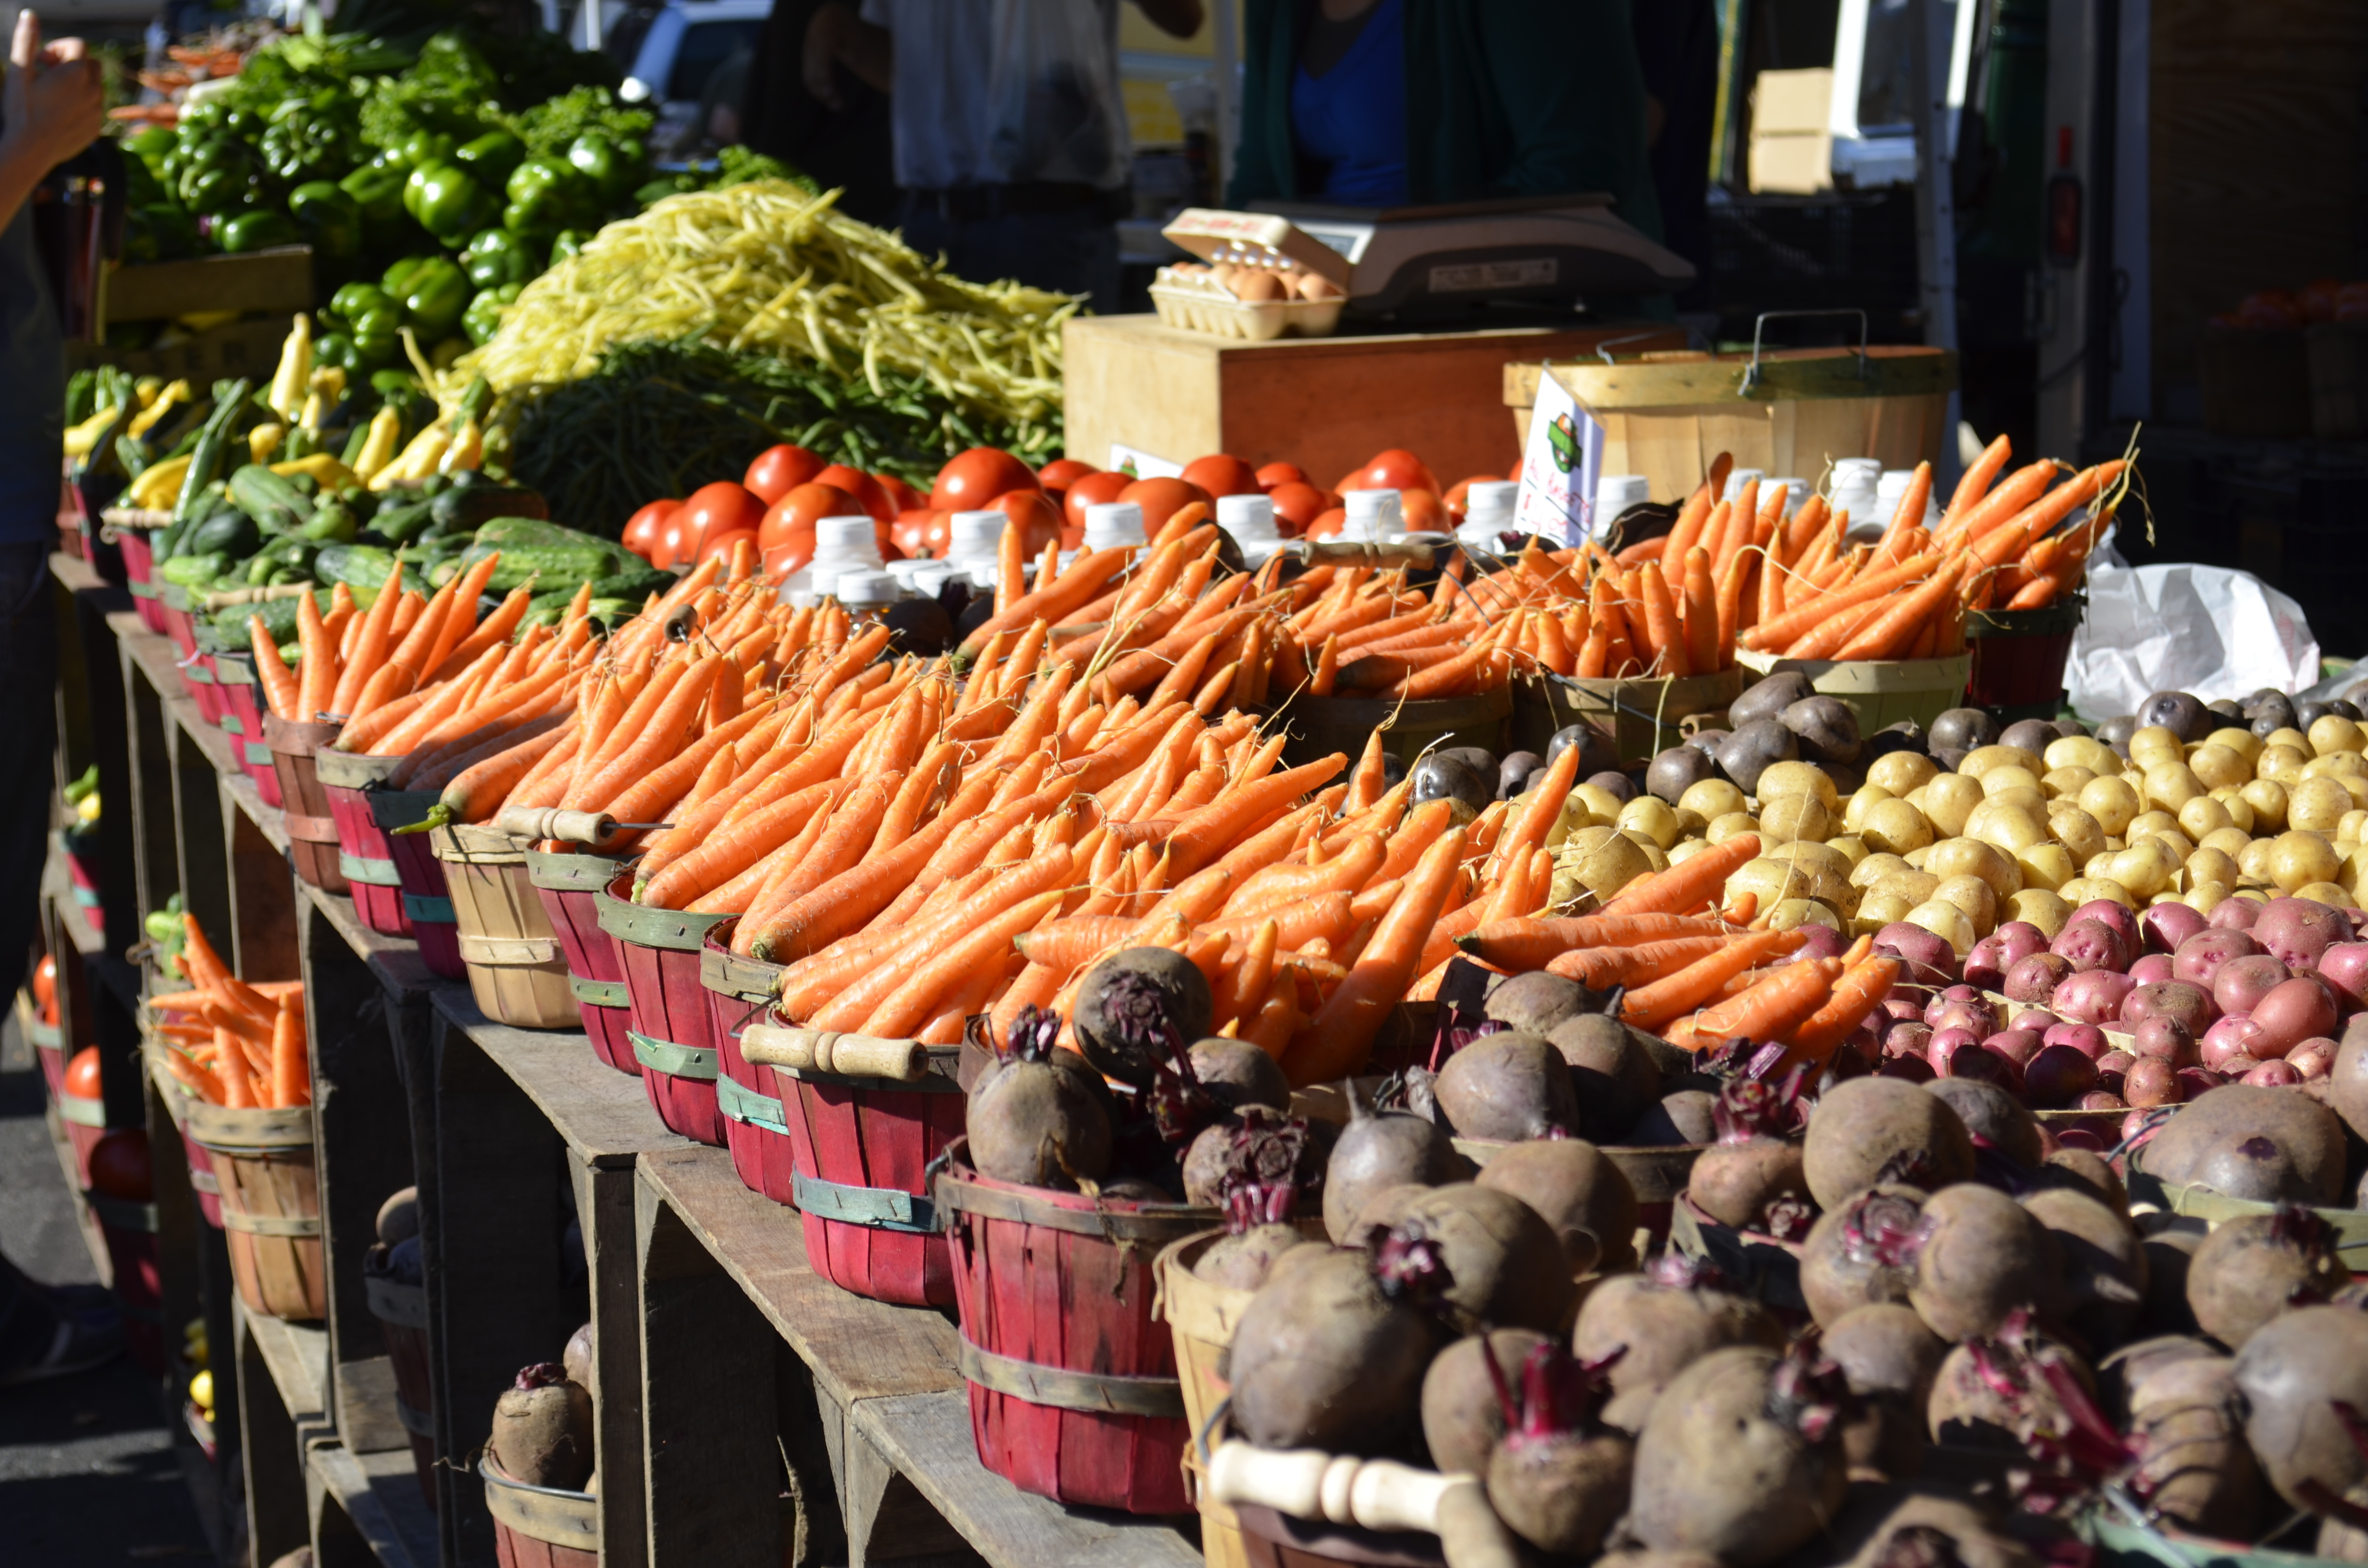 Baskets of carrots, potatoes, and other vegetables at a farmers market